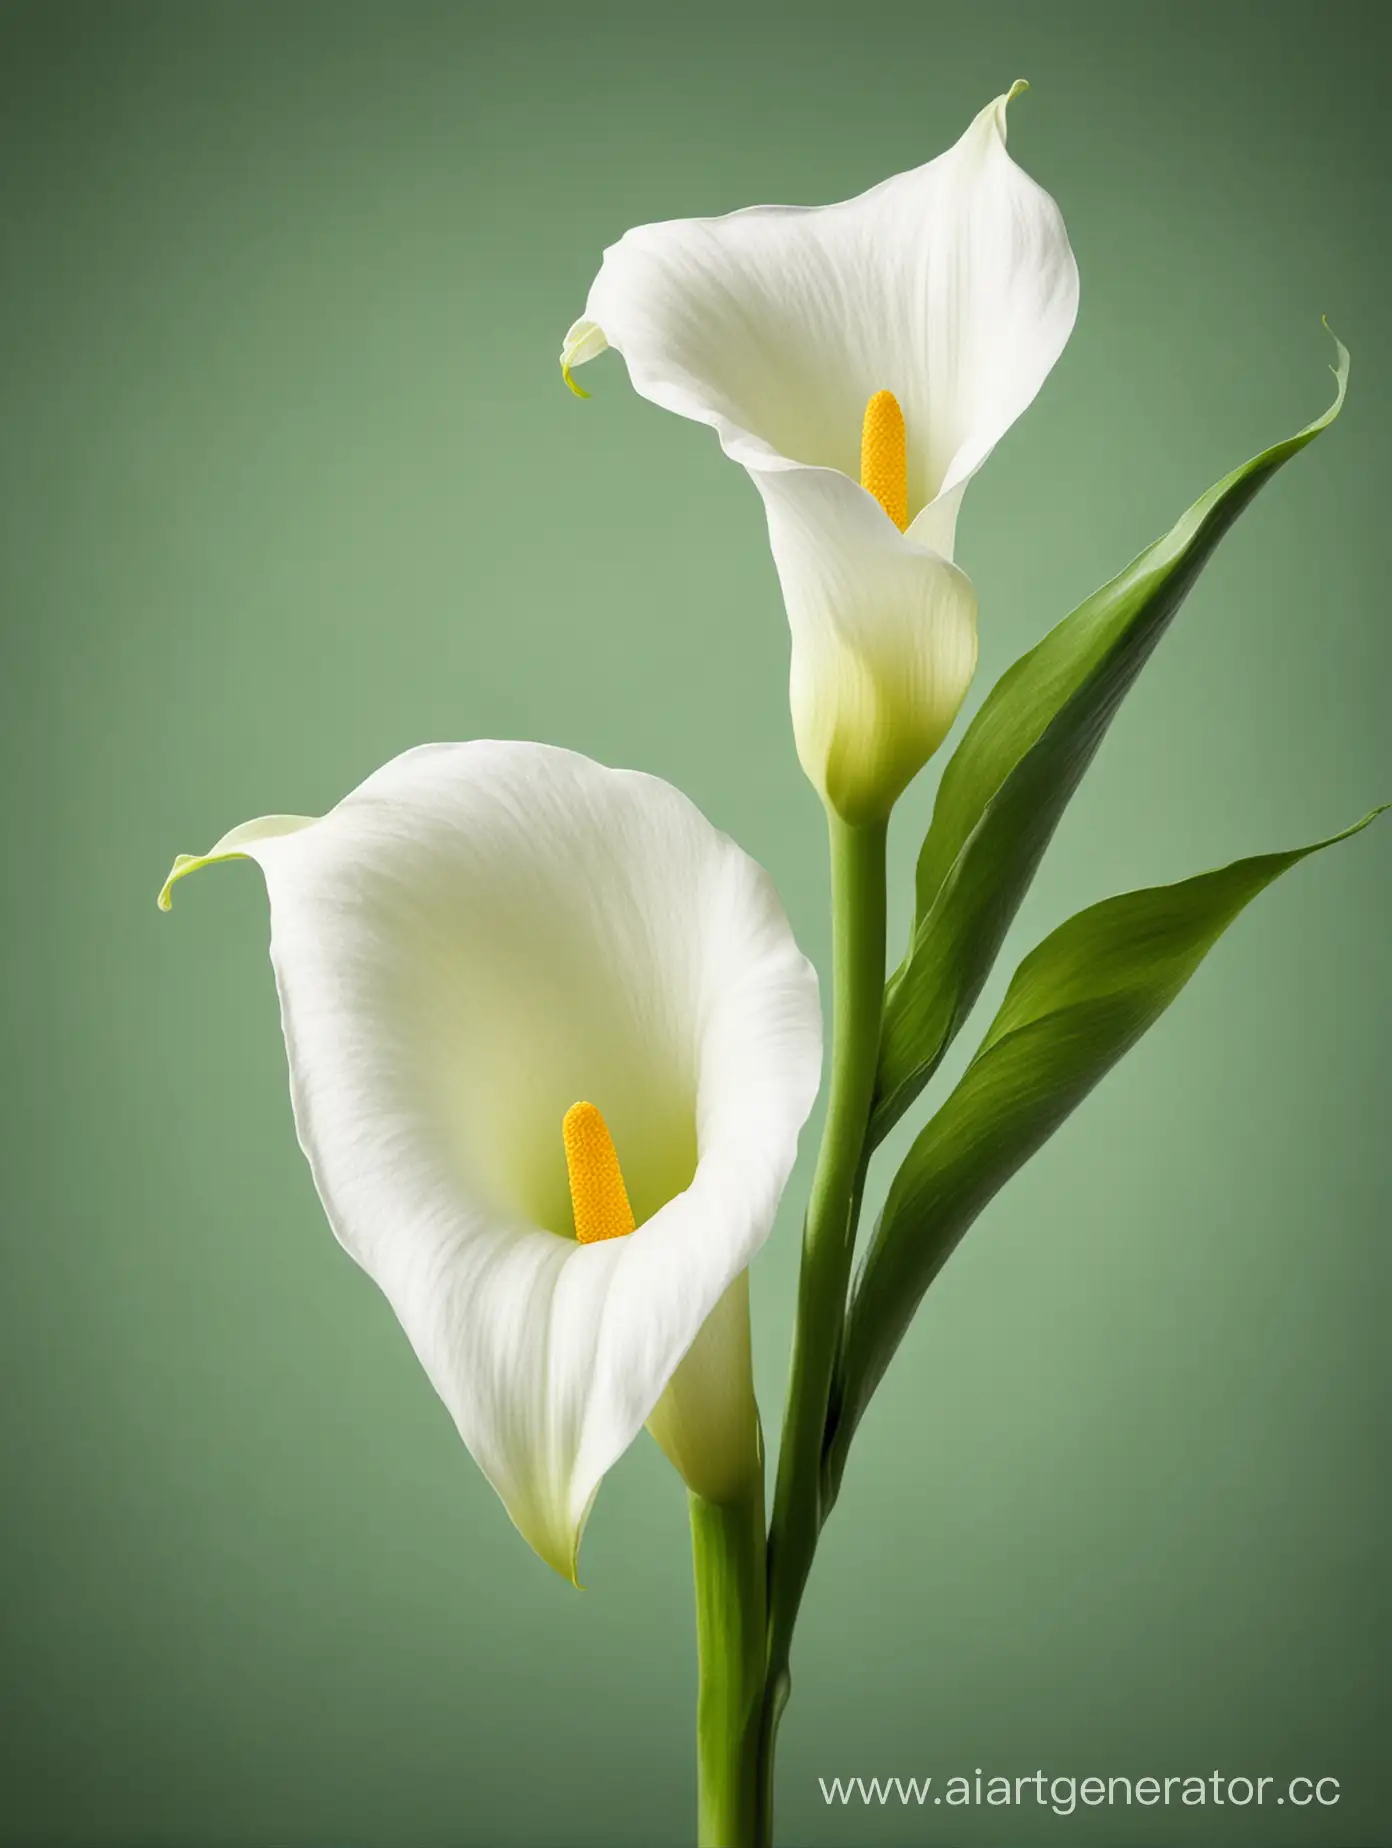 Vibrant-Calla-Lily-Flowers-Against-Lush-Green-Background